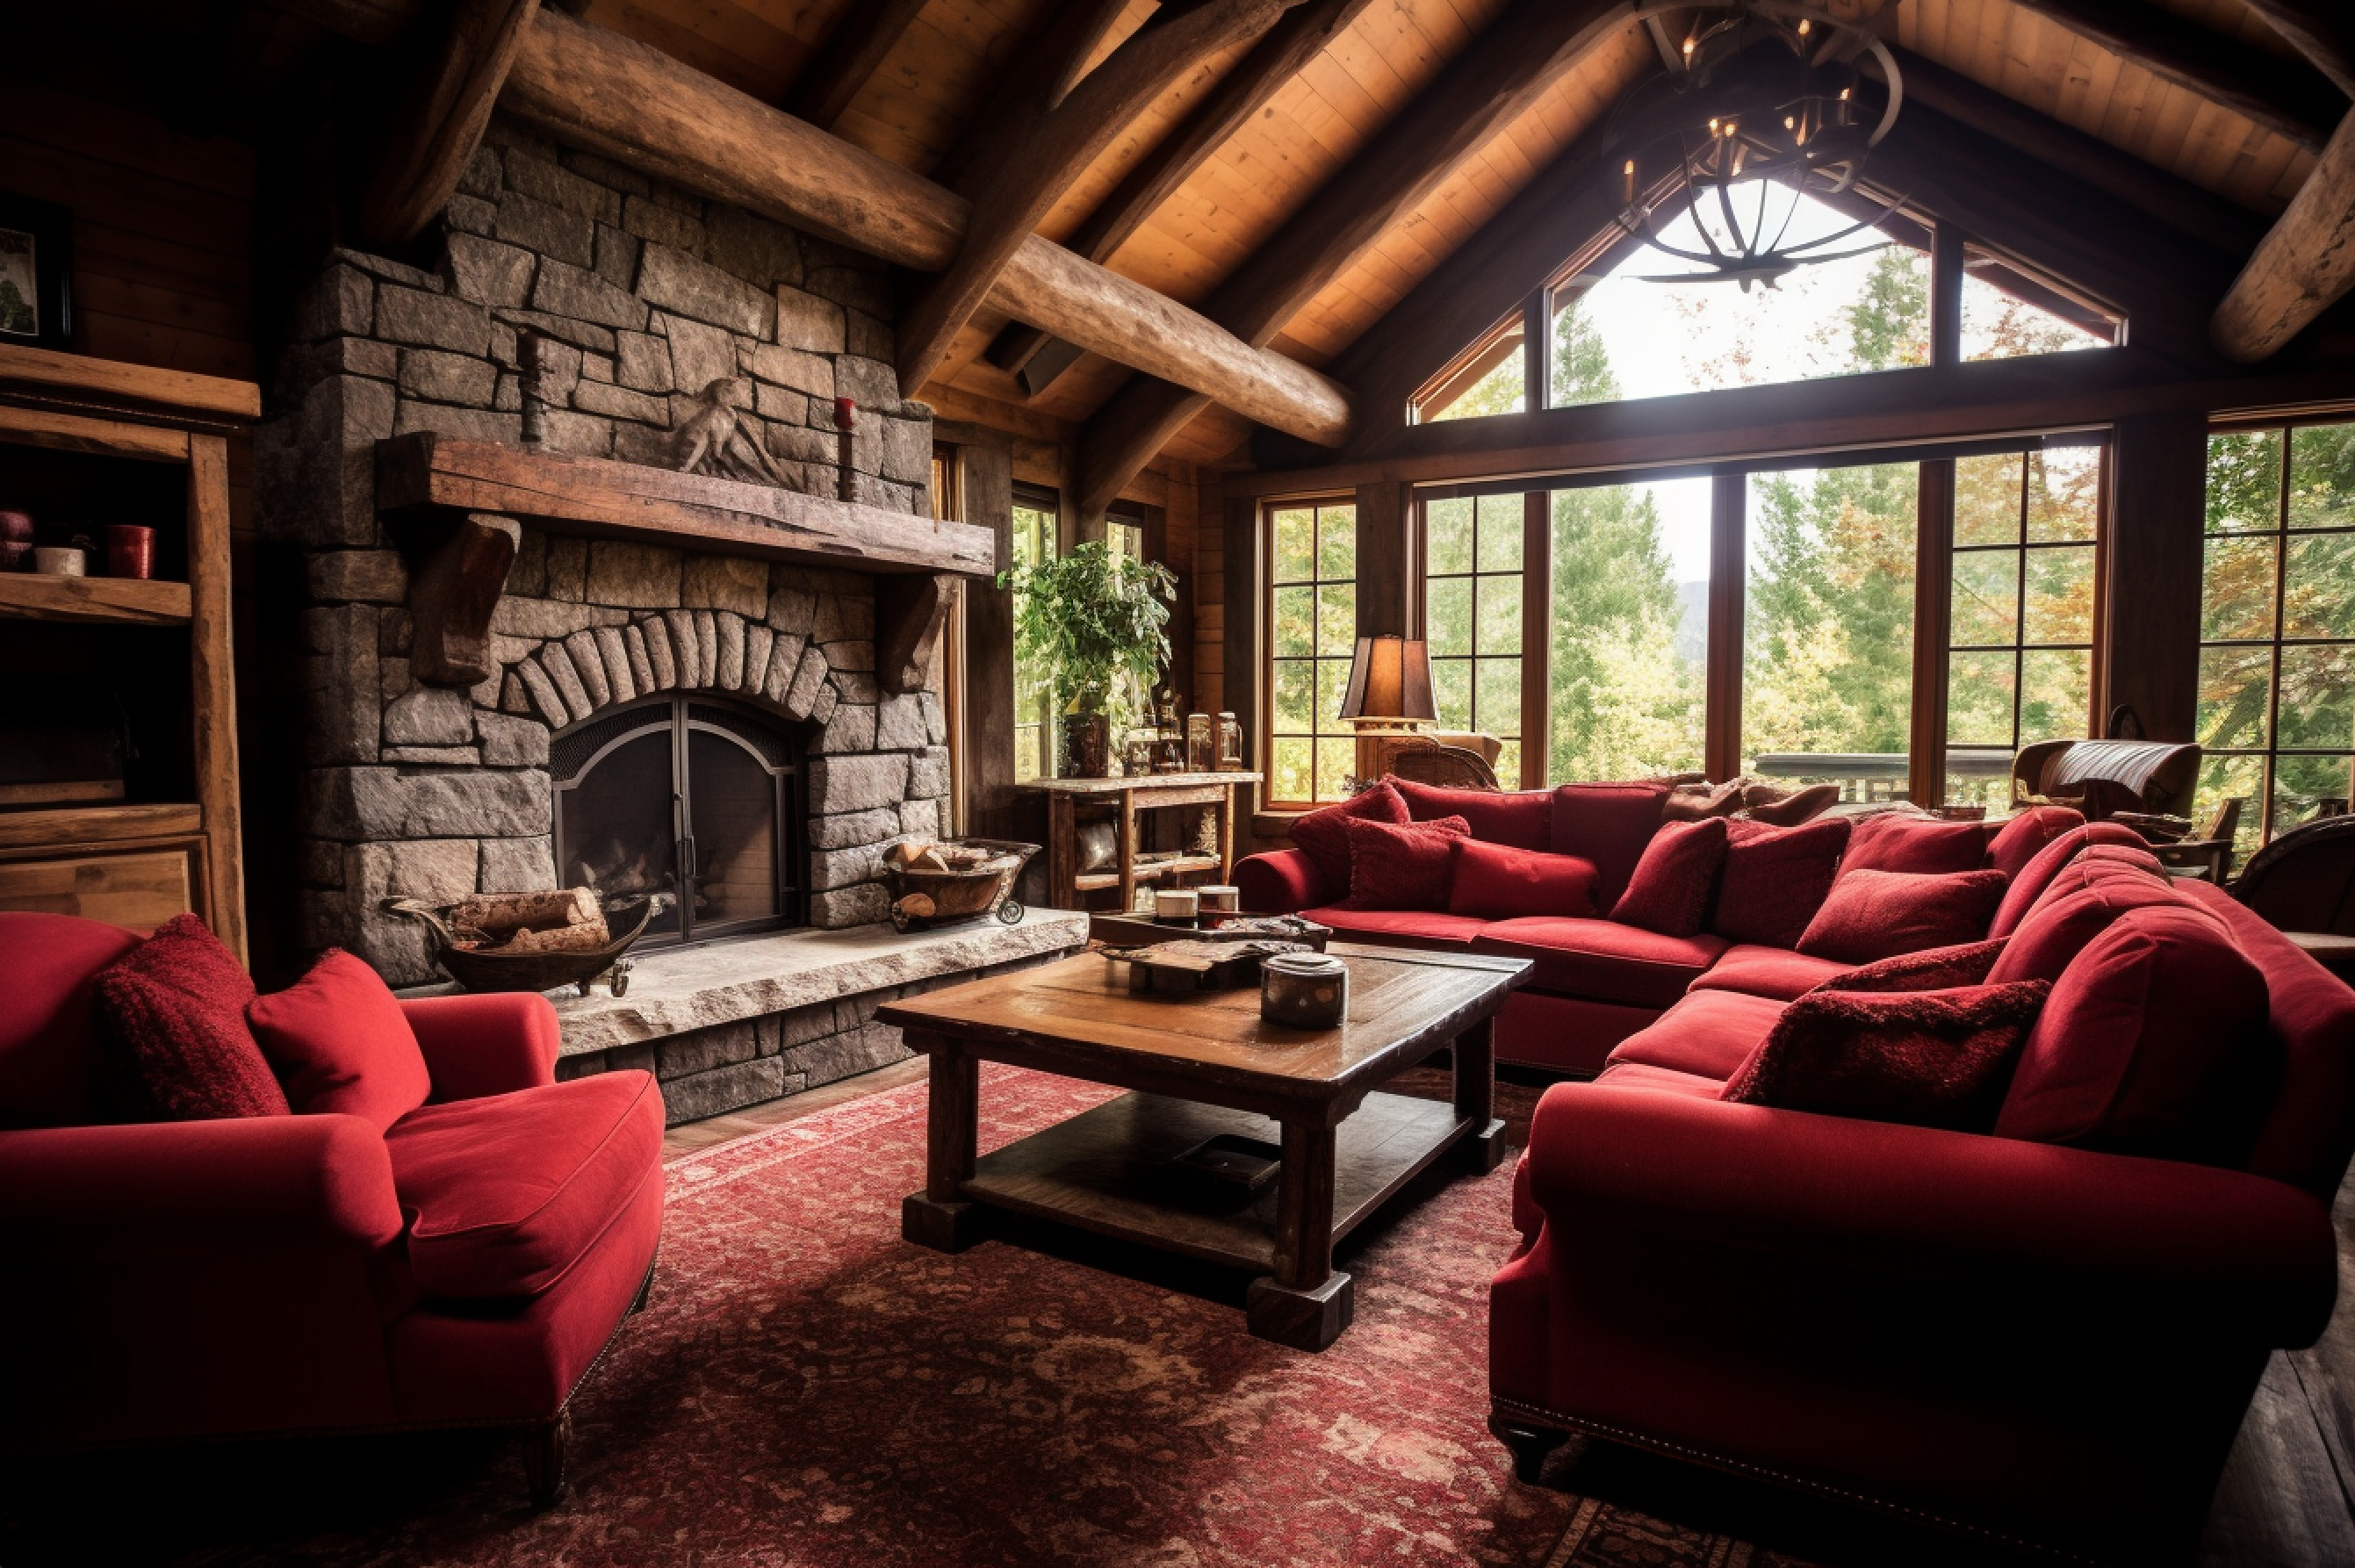 17. Red and Brown Color Scheme - Rustic Cabin Living Room